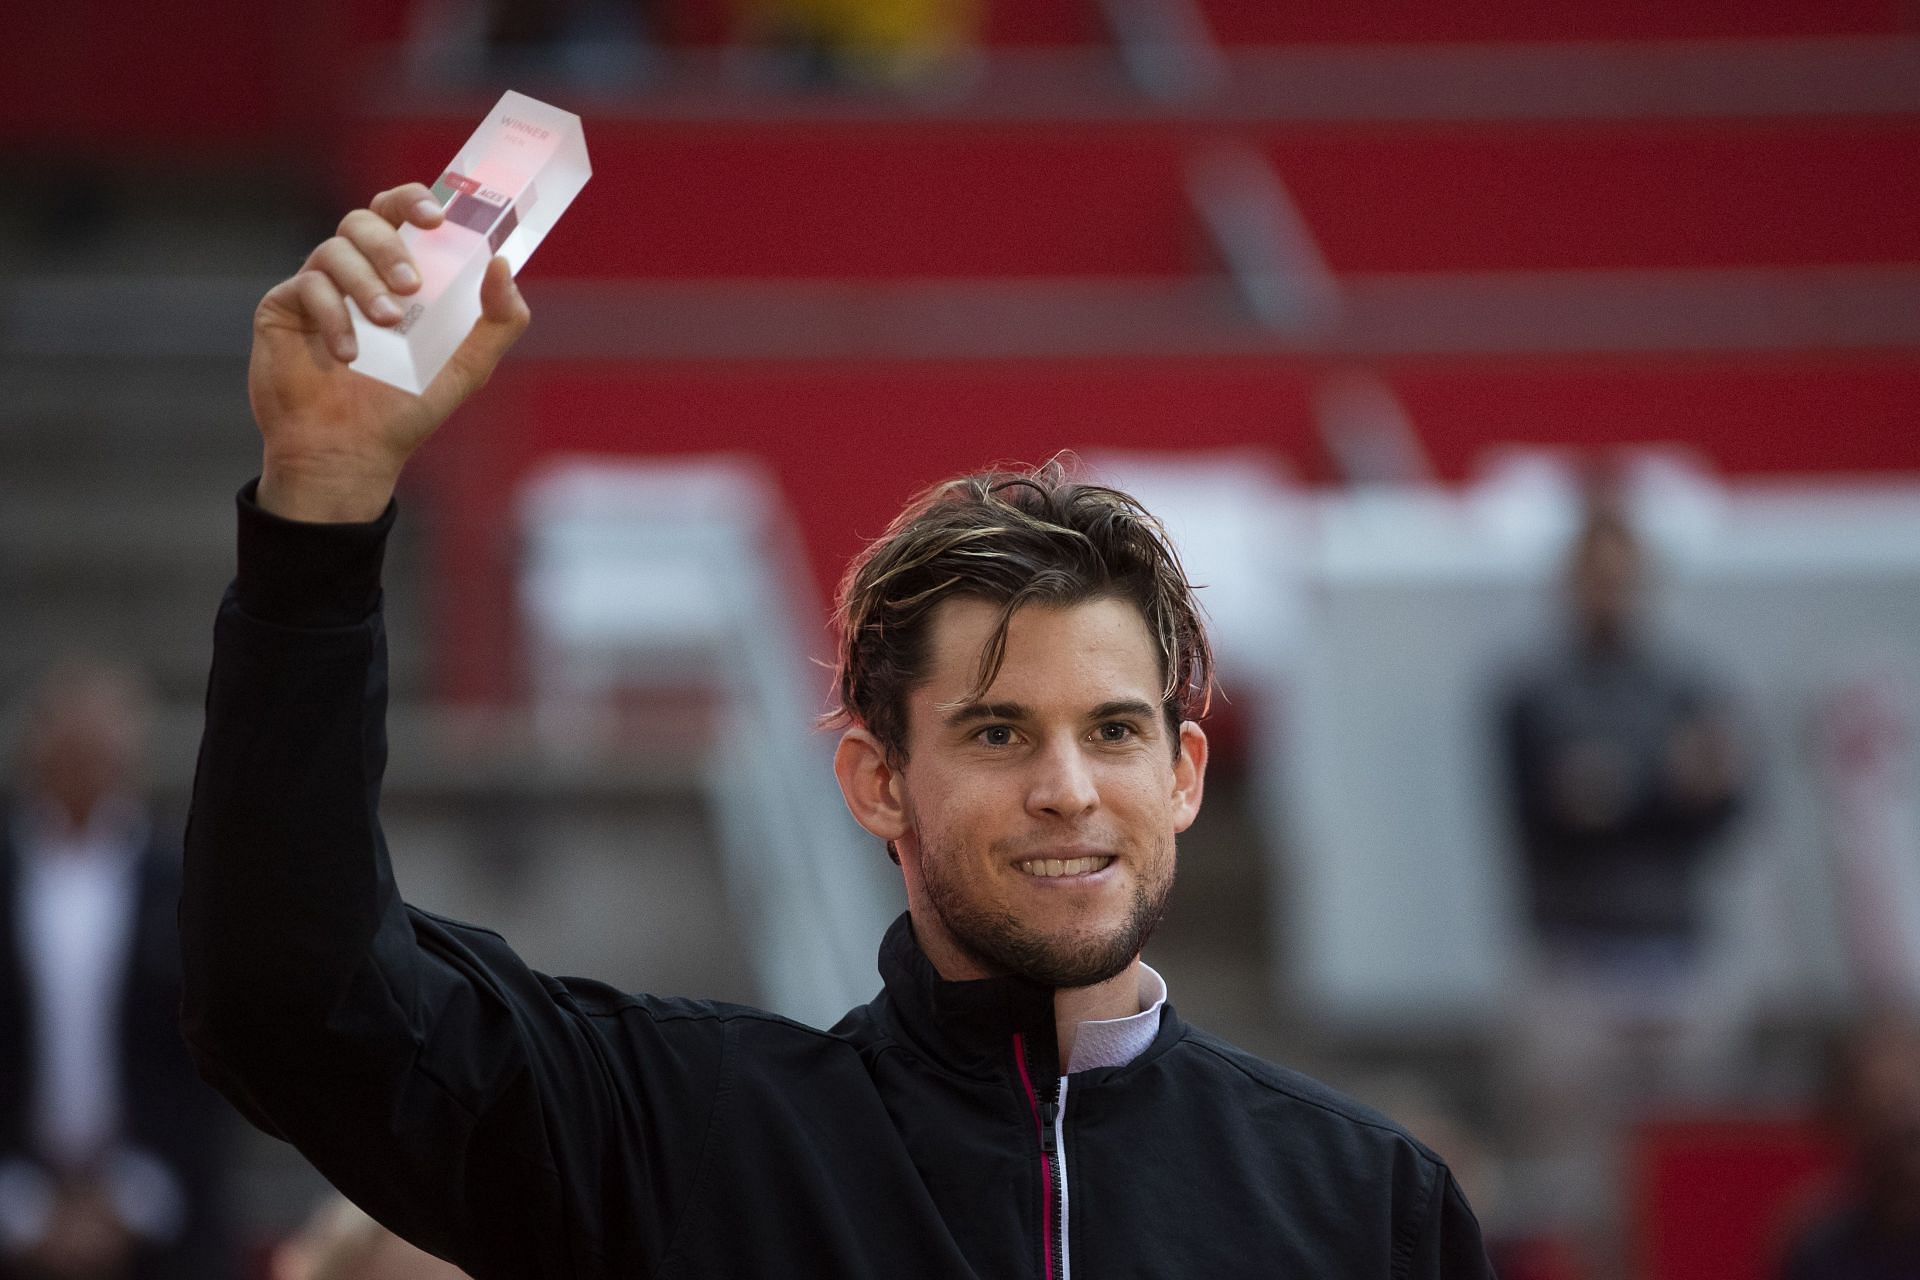 Dominic Thiem has slipped to 274 in the ATP rankings.